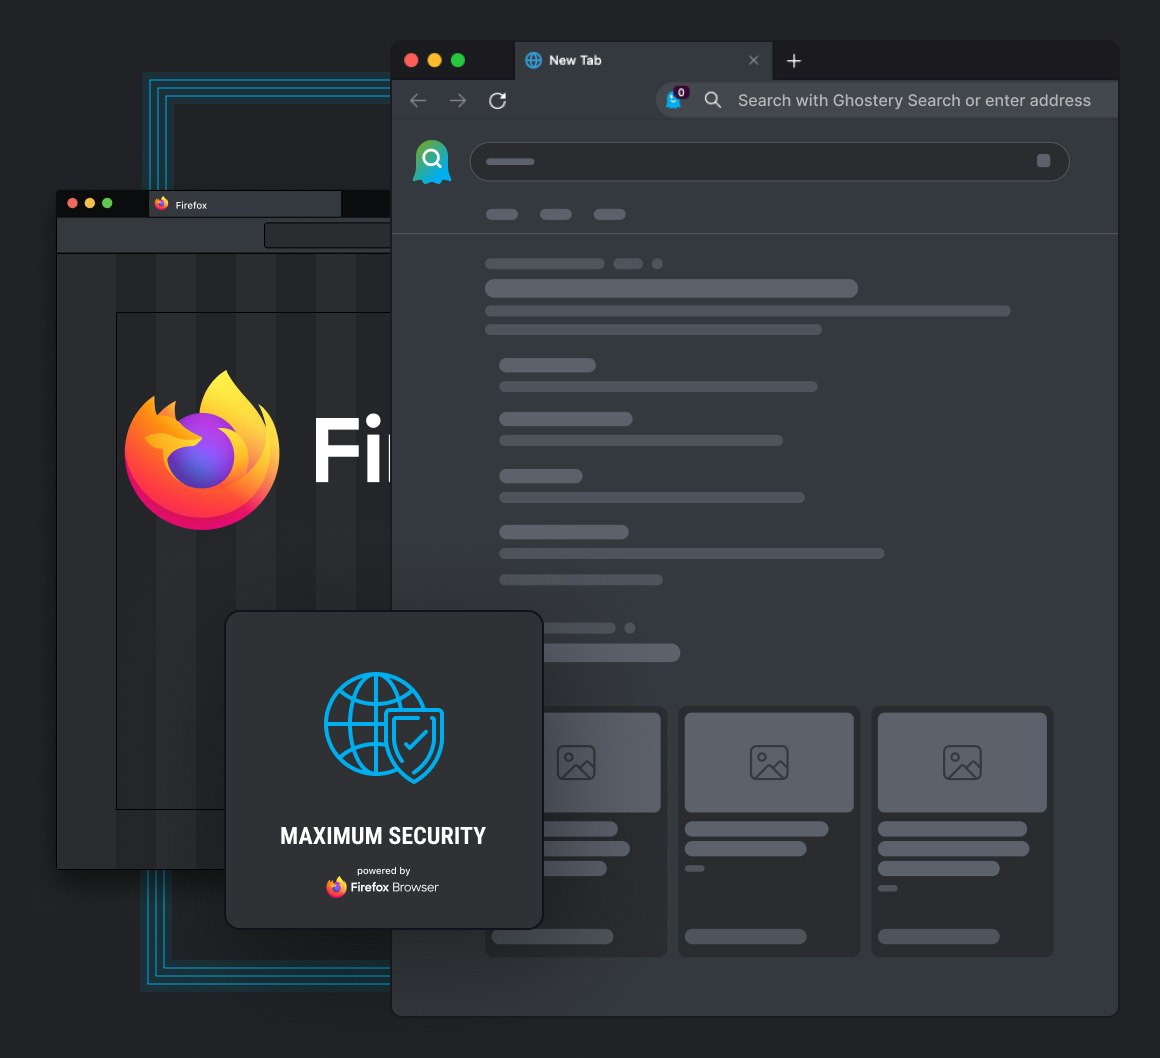 Ghostery Private Browser builds on top of Firefox browser supercharging it's default privacy and security features - Desktop view